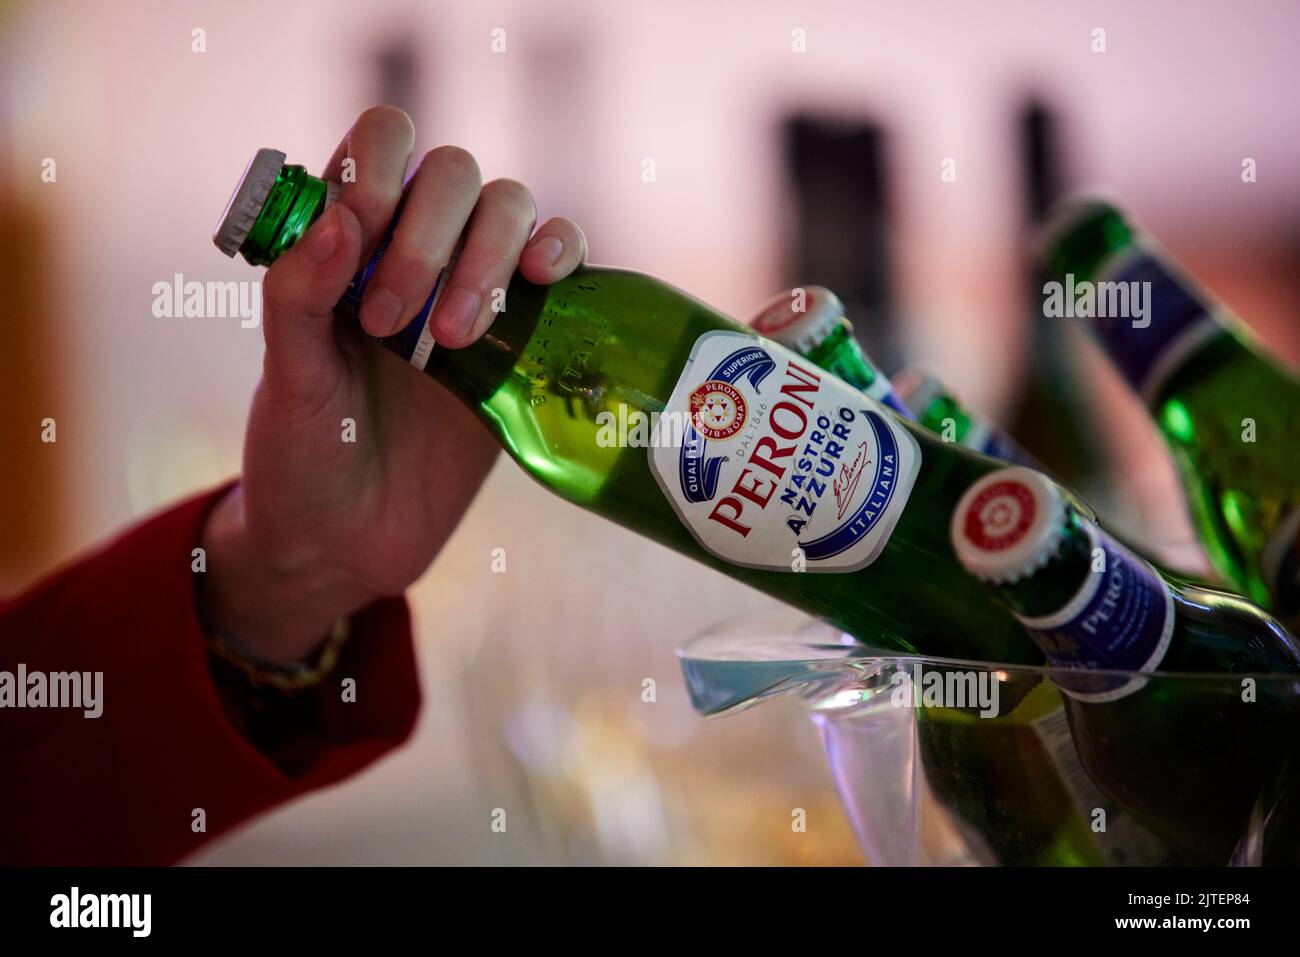 https://c8.alamy.com/comp/2JTEP84/cold-beer-in-a-bottle-at-a-party-2JTEP84.jpg